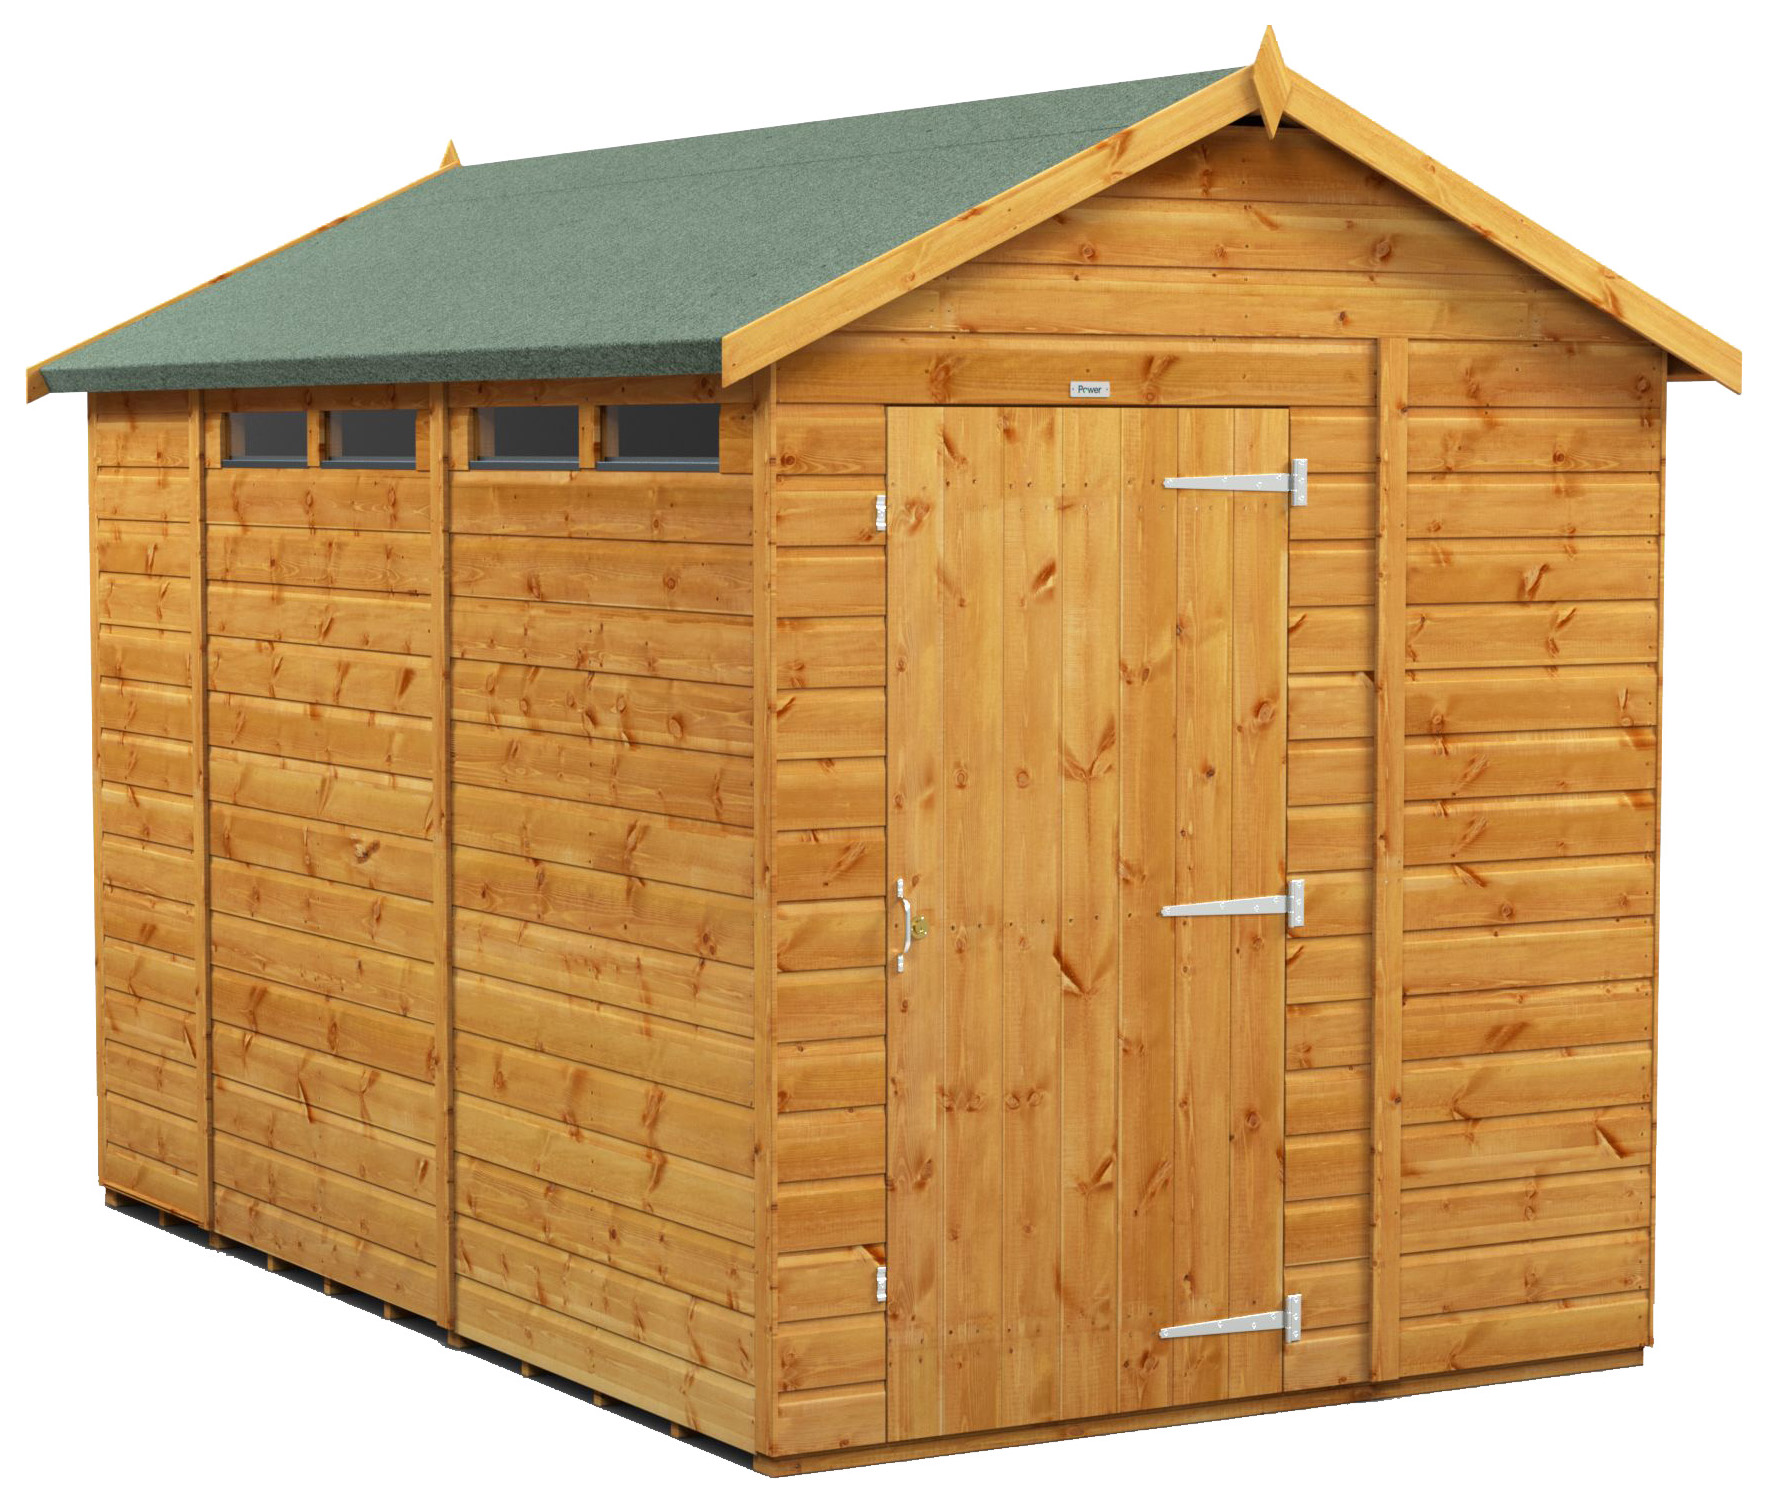 Power Sheds 10 x 6ft Apex Shiplap Dip Treated Security Shed